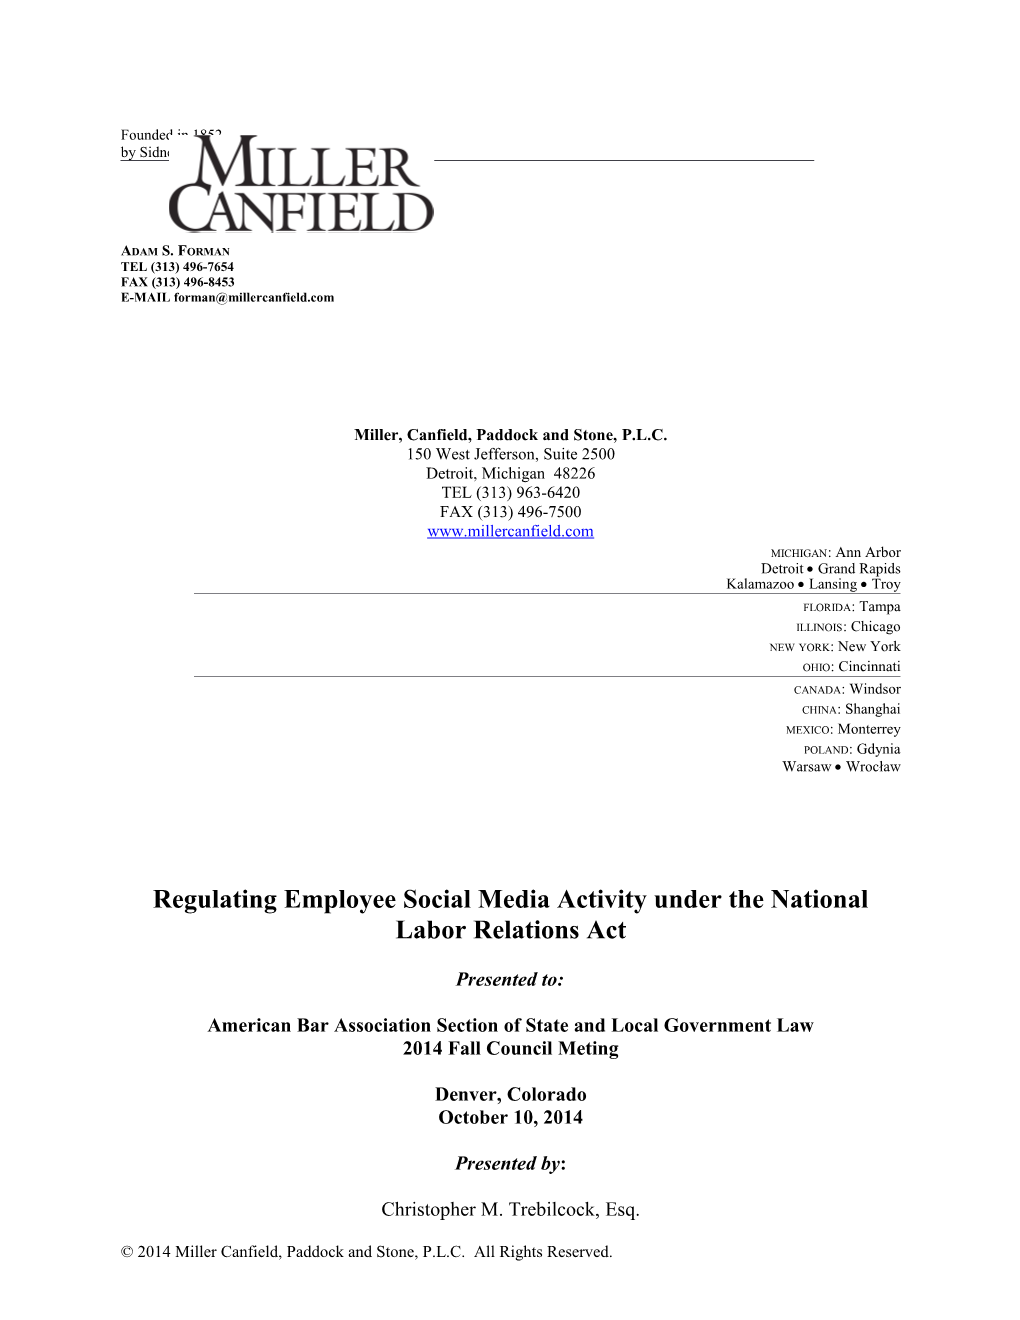 Regulating Employee Social Media Activity Under the National Labor Relations Act